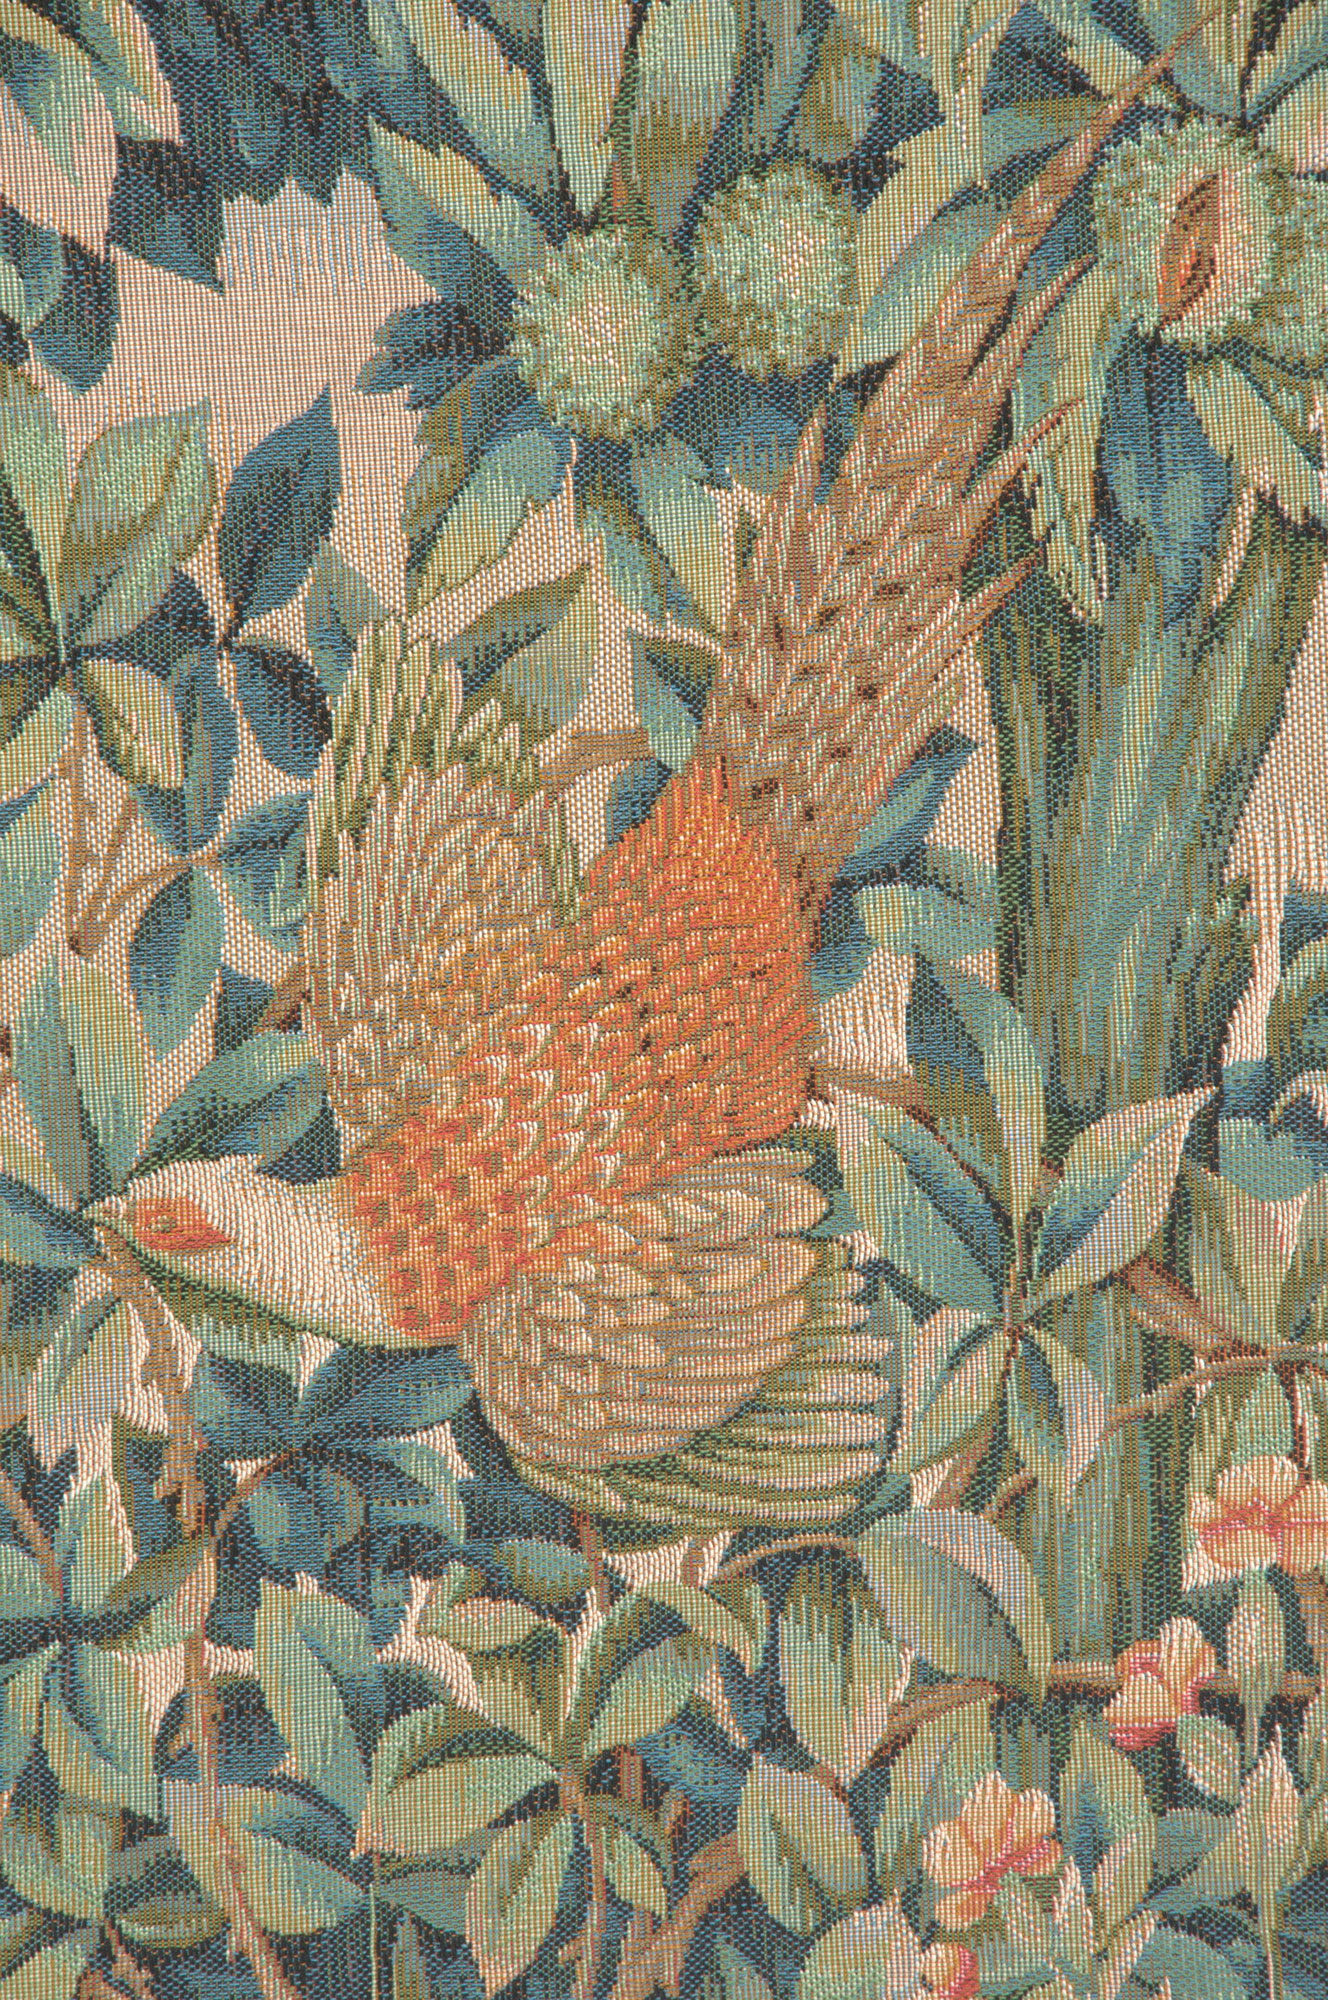 Rabbit, Pheasant, and Doe French Tapestry | Close Up 2